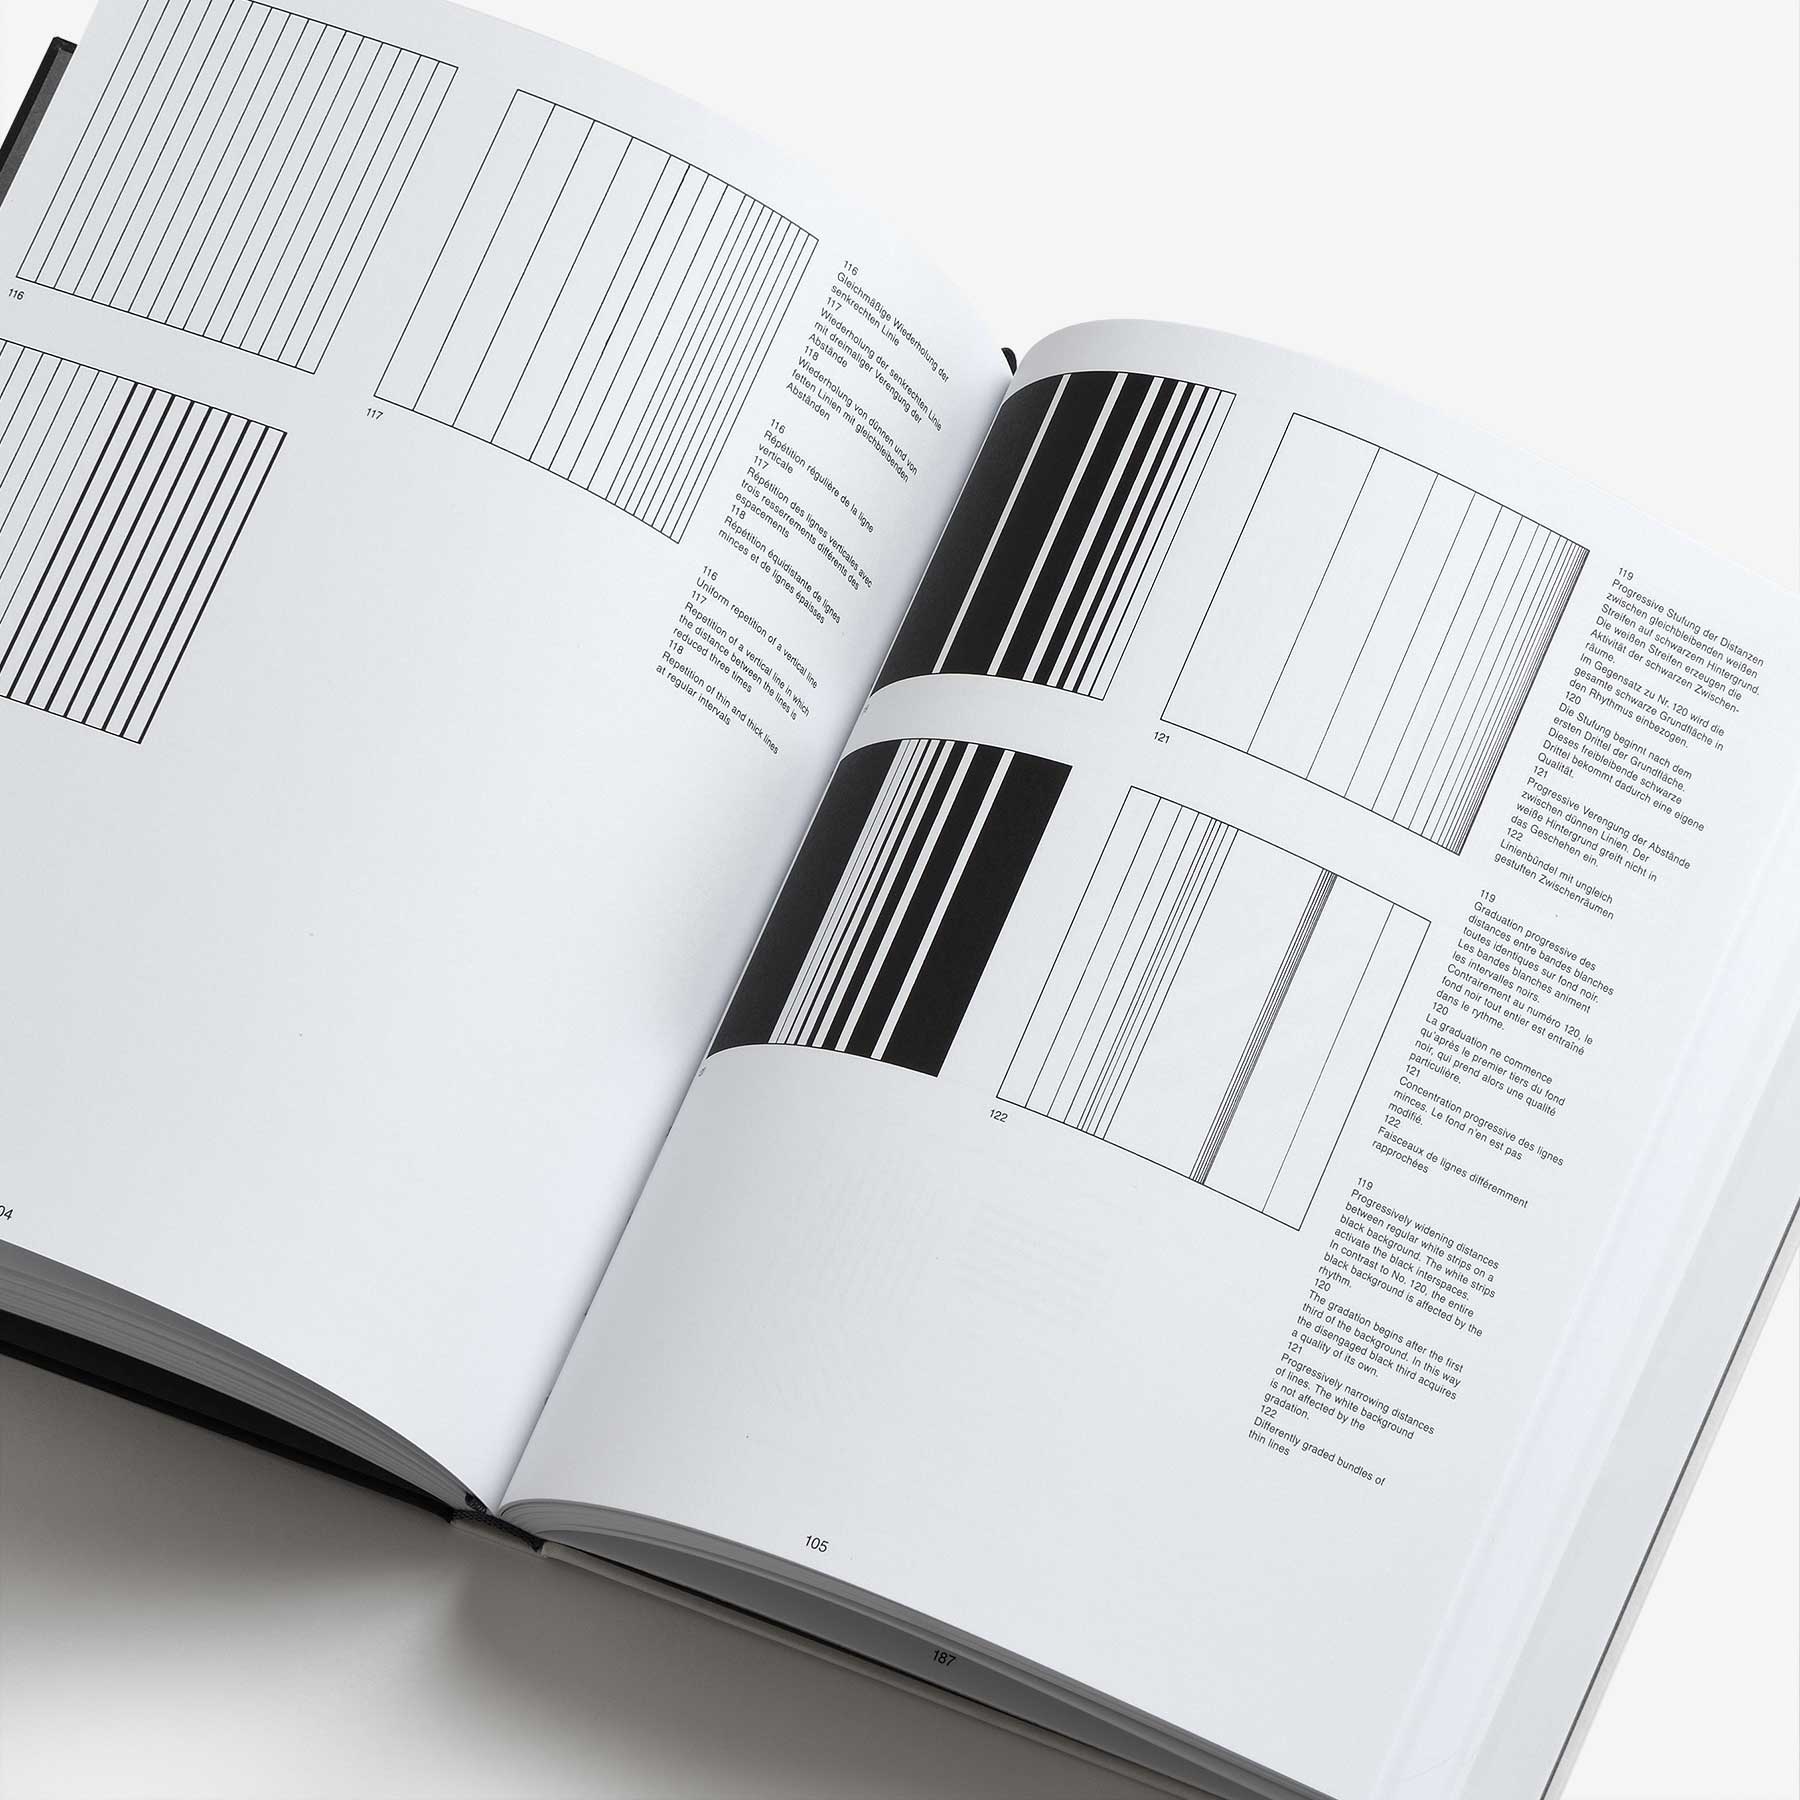 Graphic Design Manual: Principles and Practice